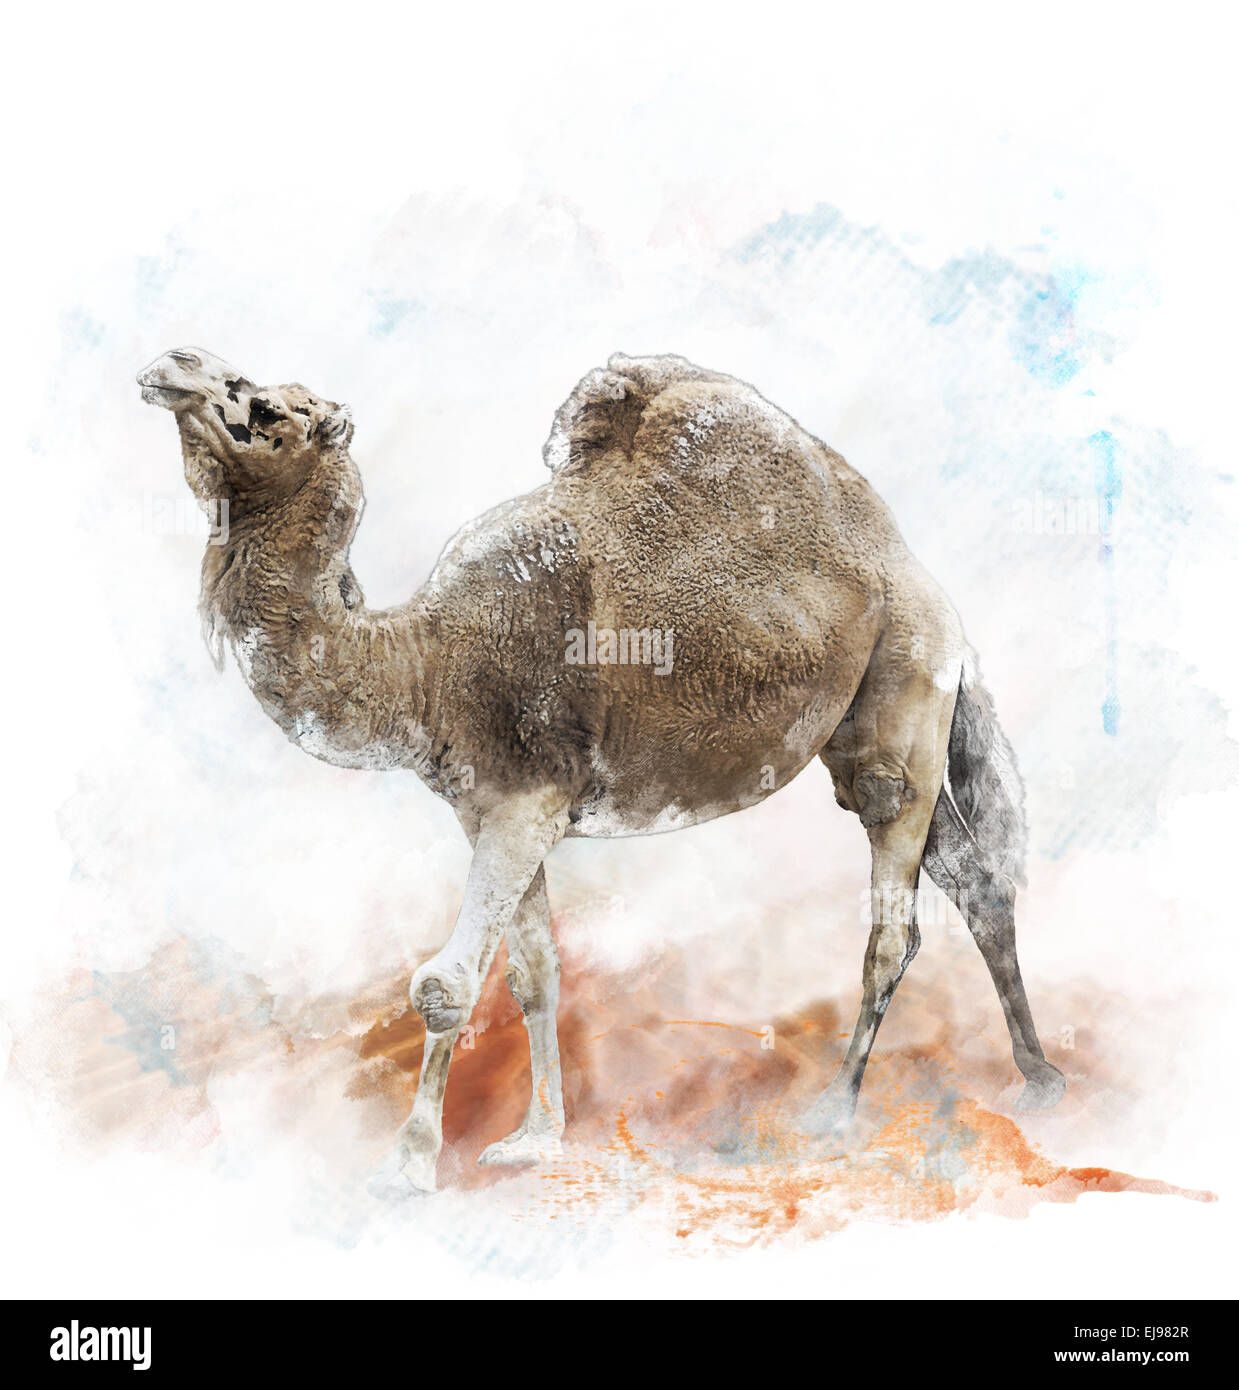 Watercolor Image Of  Single-Humped Camel Stock Photo